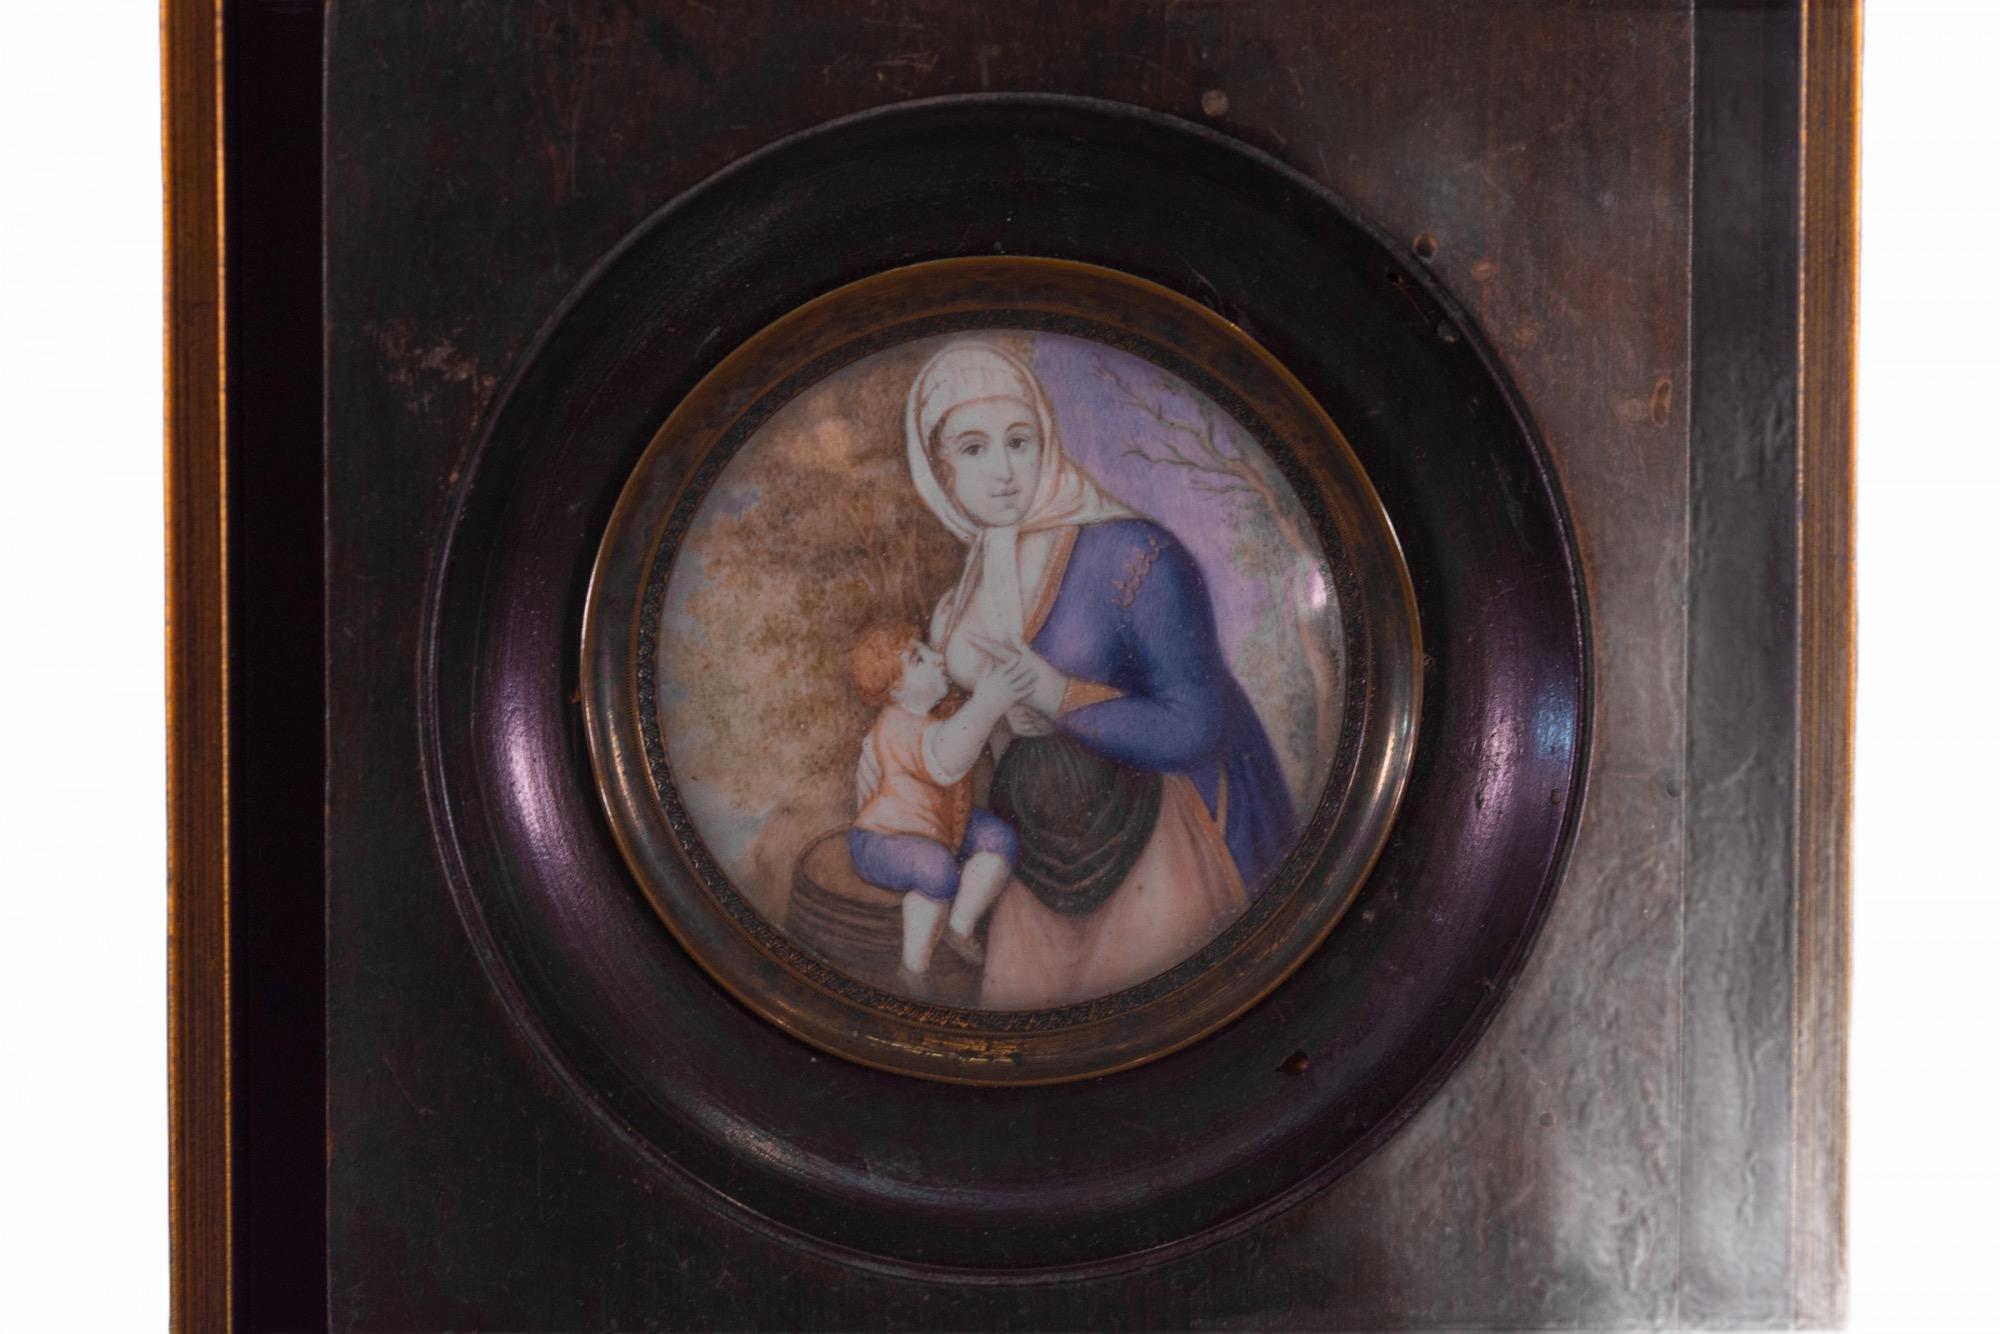 A group of five European paintings of the Virgin Mary over white bone. Each piece is mounted on a hand-painted black panel and framed individually with a gold gilded frame. The grouping is mounted on a Lucite panel, and framed with a coordinating